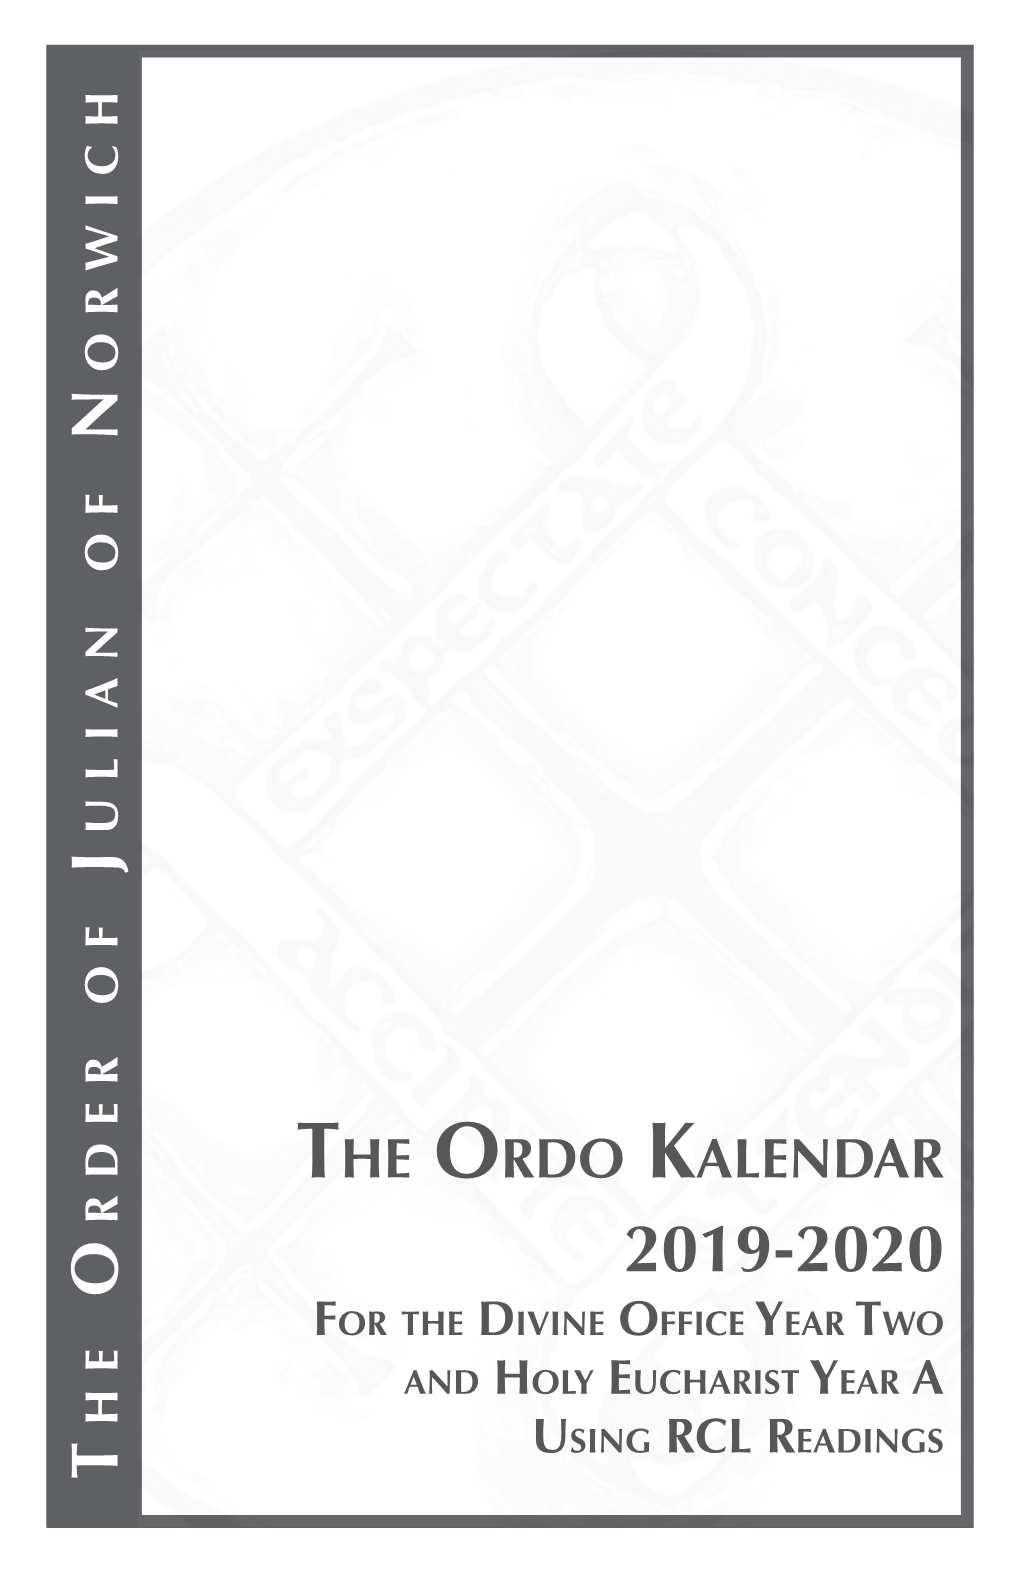 The Ordo Kalendar 2019-2020 for the Divine Office Y Ear Two and Holy Eucharist Y Ear a Using Rcl Readings Introduction